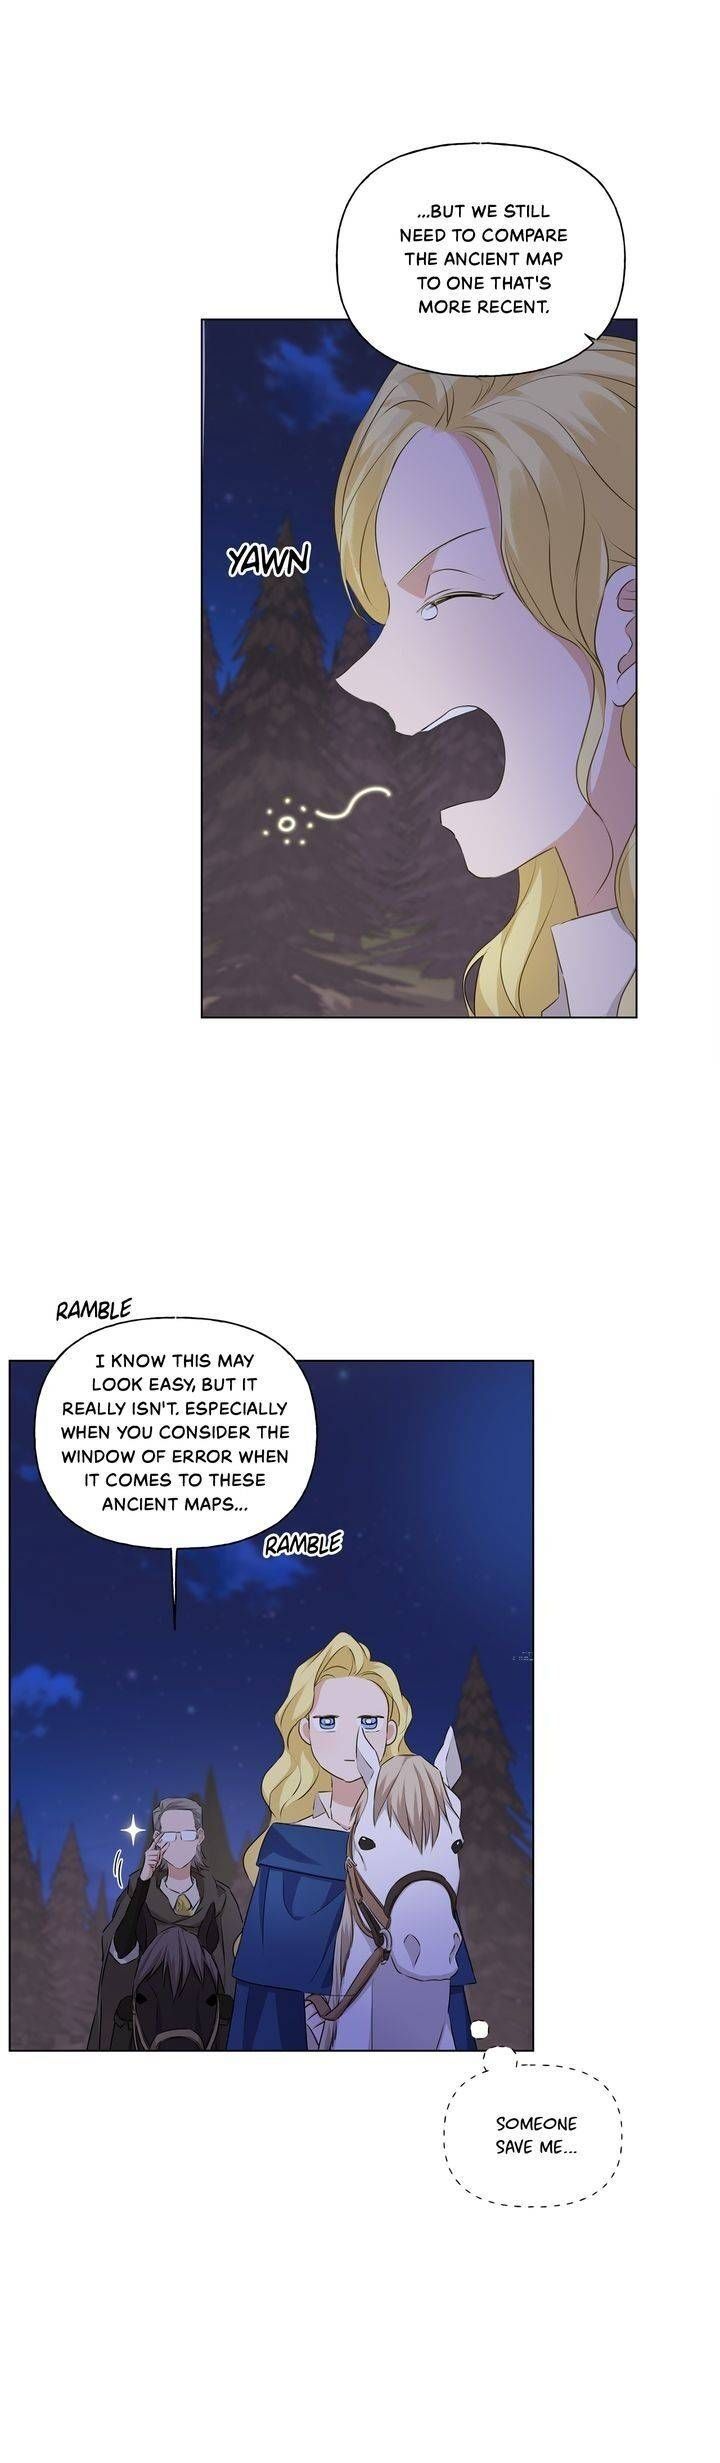 The Golden Haired Wizard - Page 2